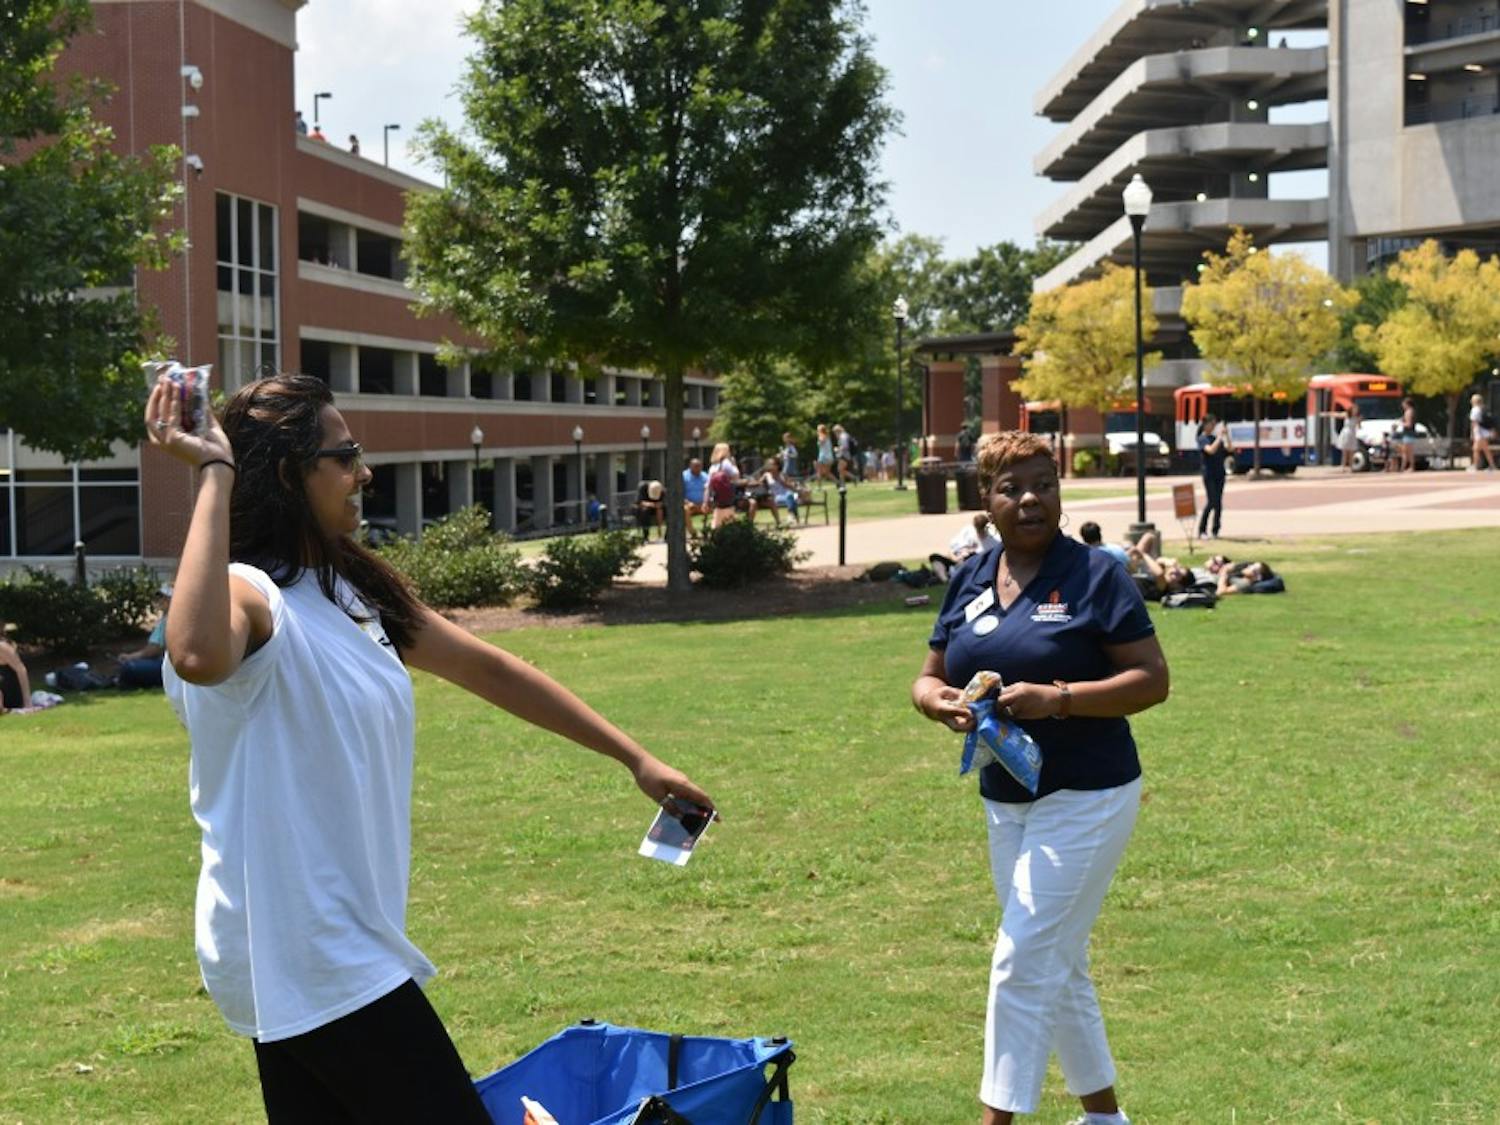 The COSAM office of diversity and multicultural affairs handed out Sun Chips and moon pies to students on the green space.